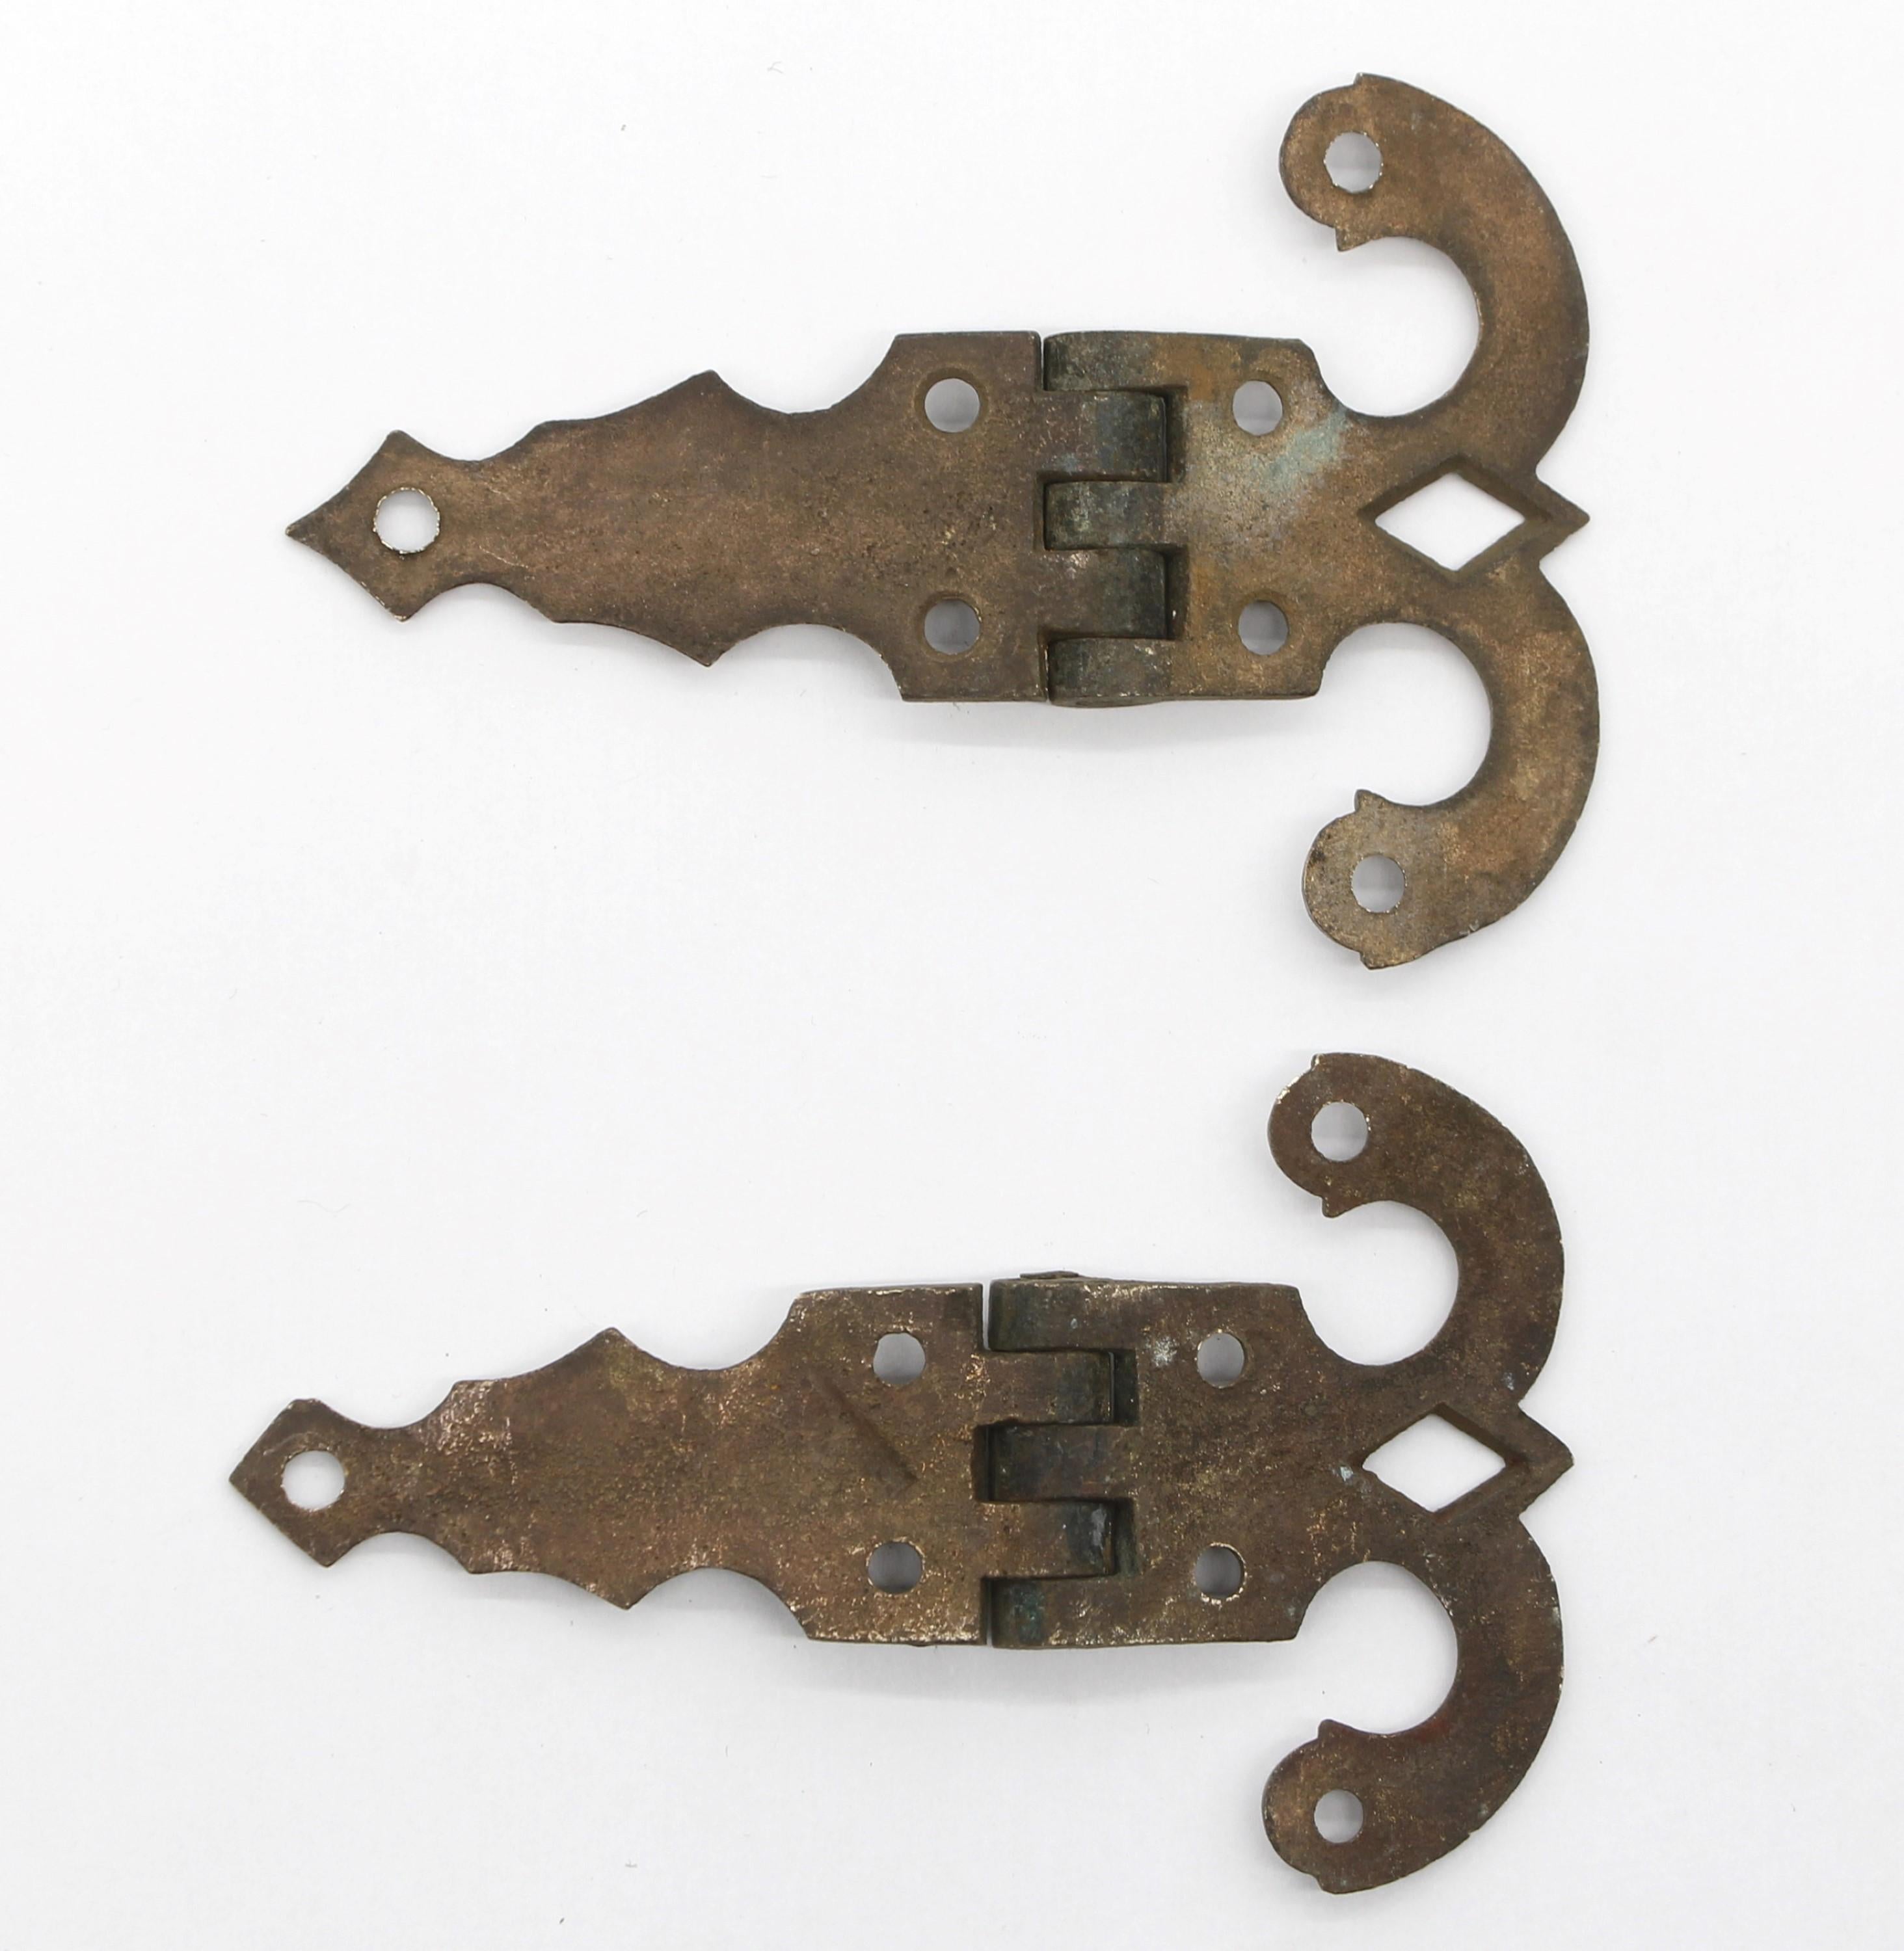 Early 20th century pair of matching solid bronze antique surface mount ice box hinges featuring five knuckles. Priced as a pair. Please note, this item is located in our Scranton, PA location.